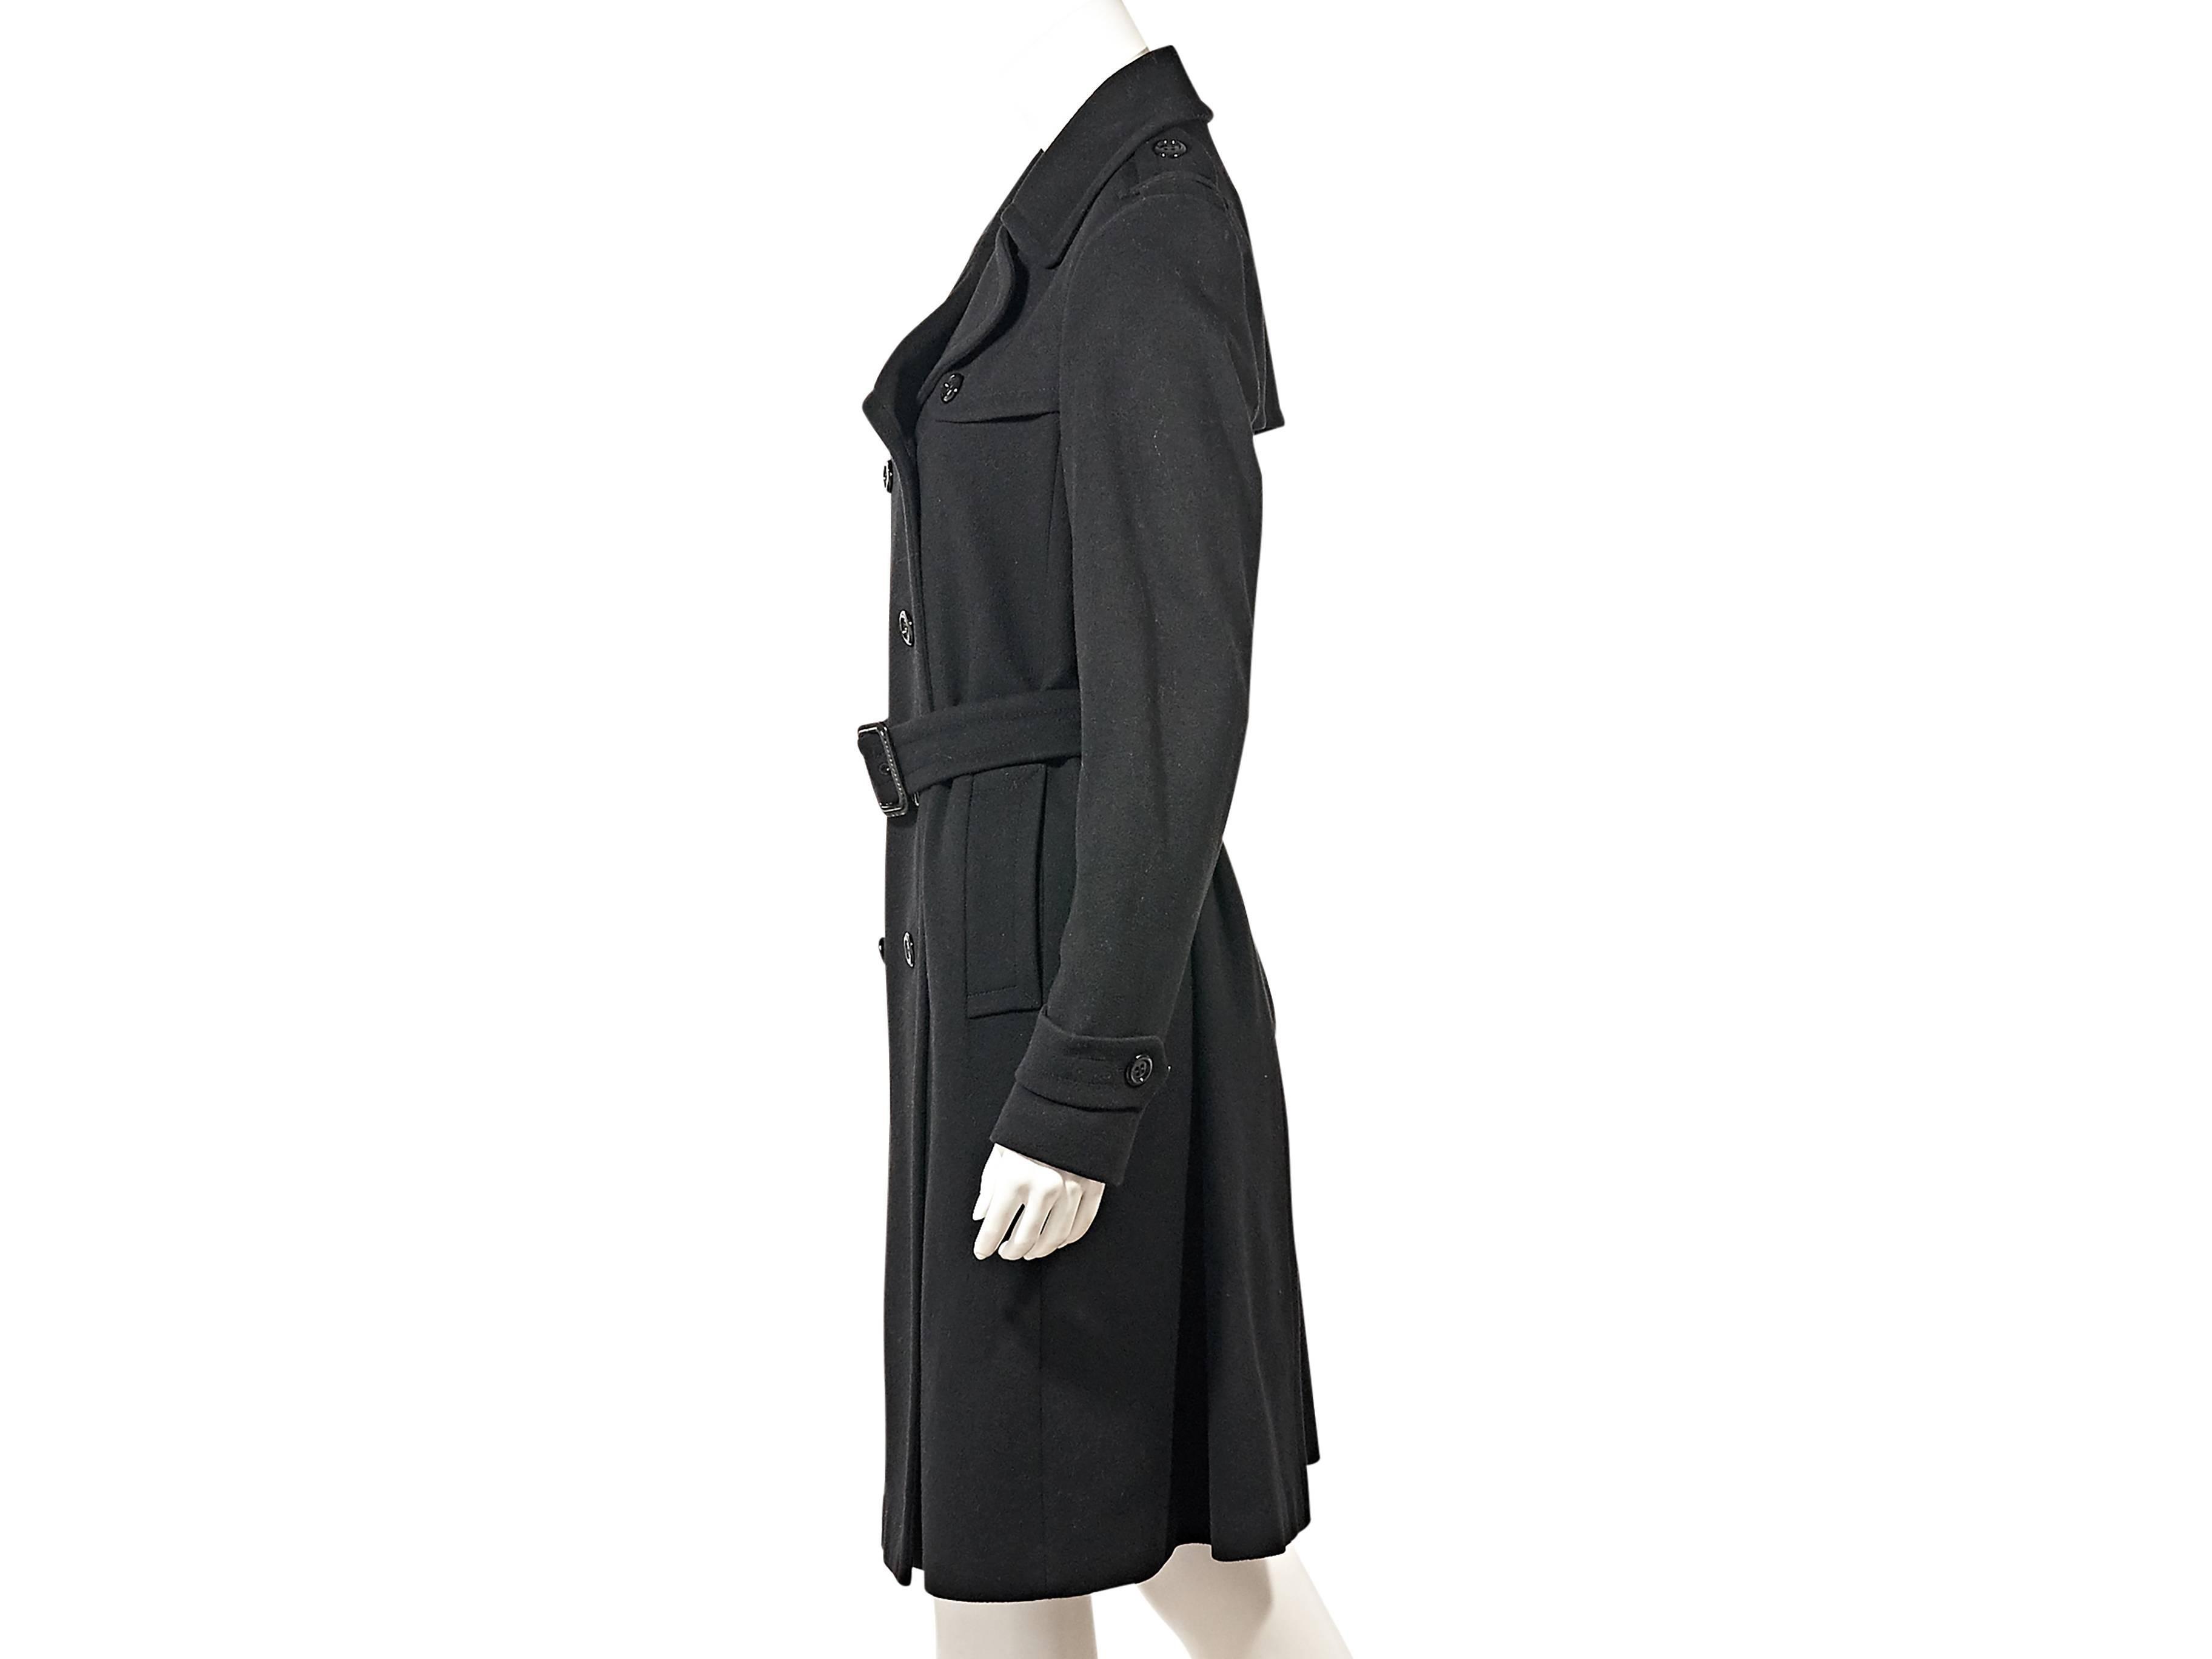 Product details:  ﻿Black wool trench coat by Burberry.  Notched lapel.  Long sleeves.  Adjustable button strap cuffs.  Double-breasted button-front closure.  Adjustable belted waist.  Front slide pockets.  Back storm vent.  Back hem vent.